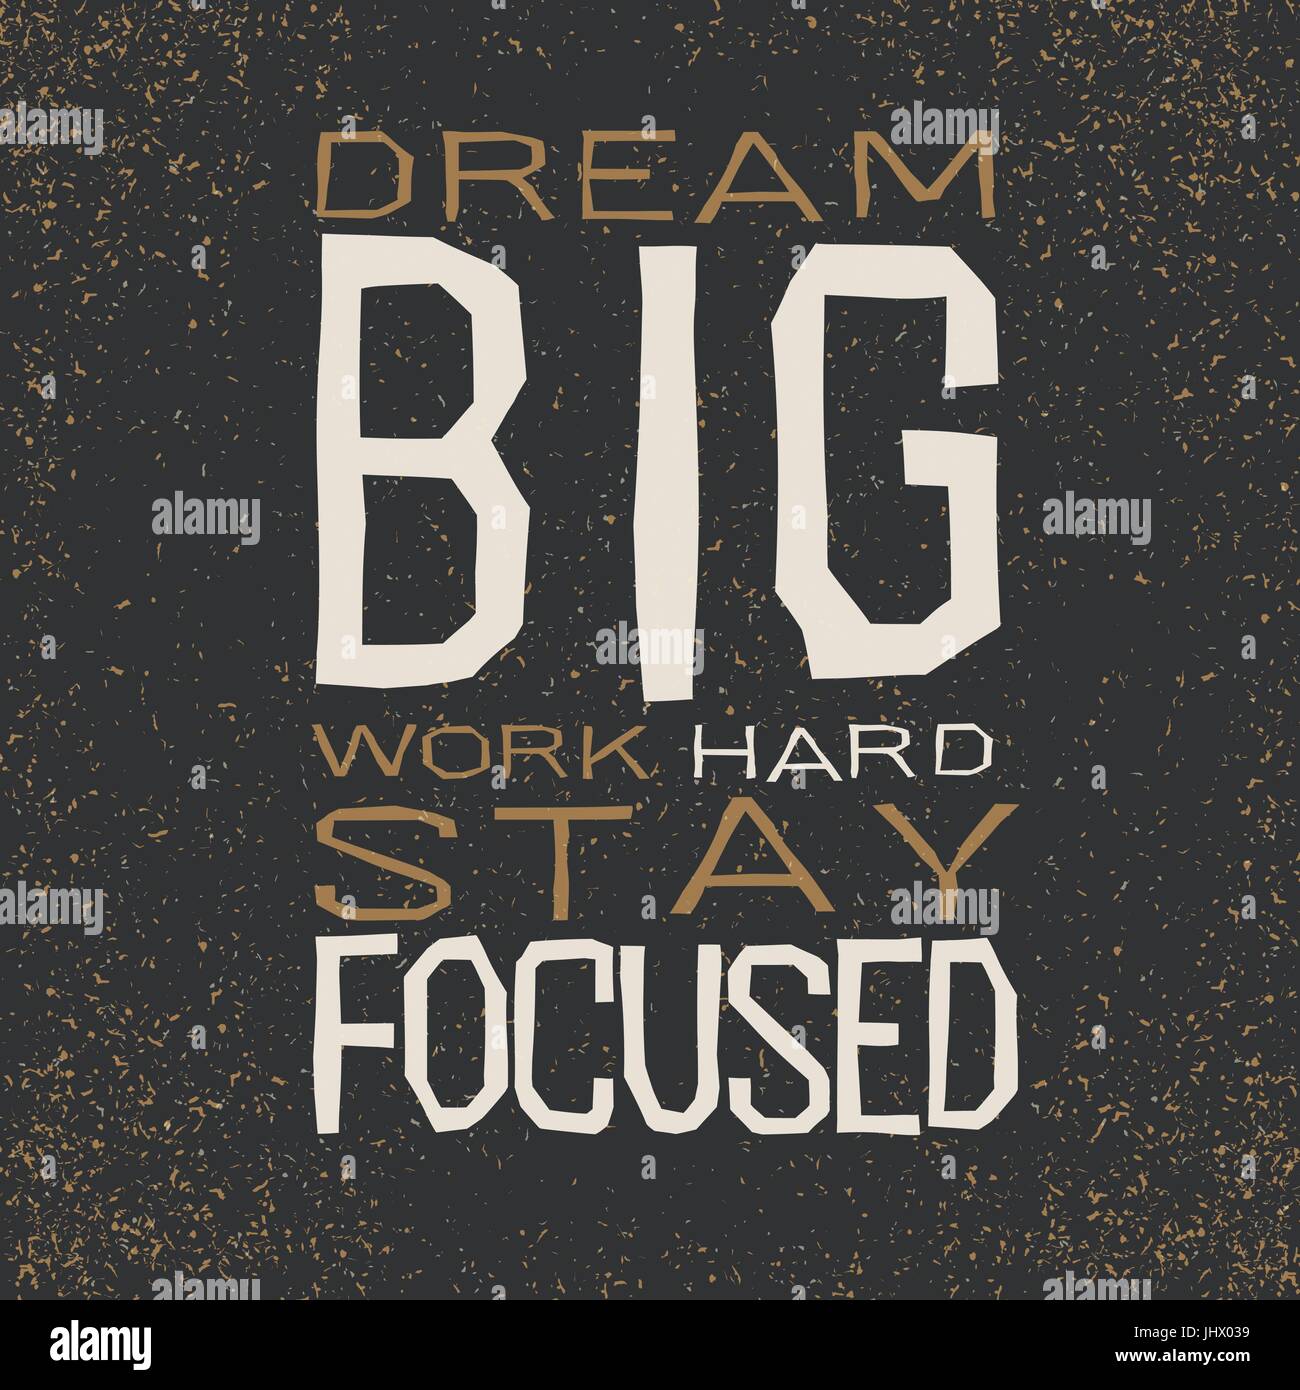 dream big work hard stay focused Inspirational quote Stock Vector Image   Art  Alamy